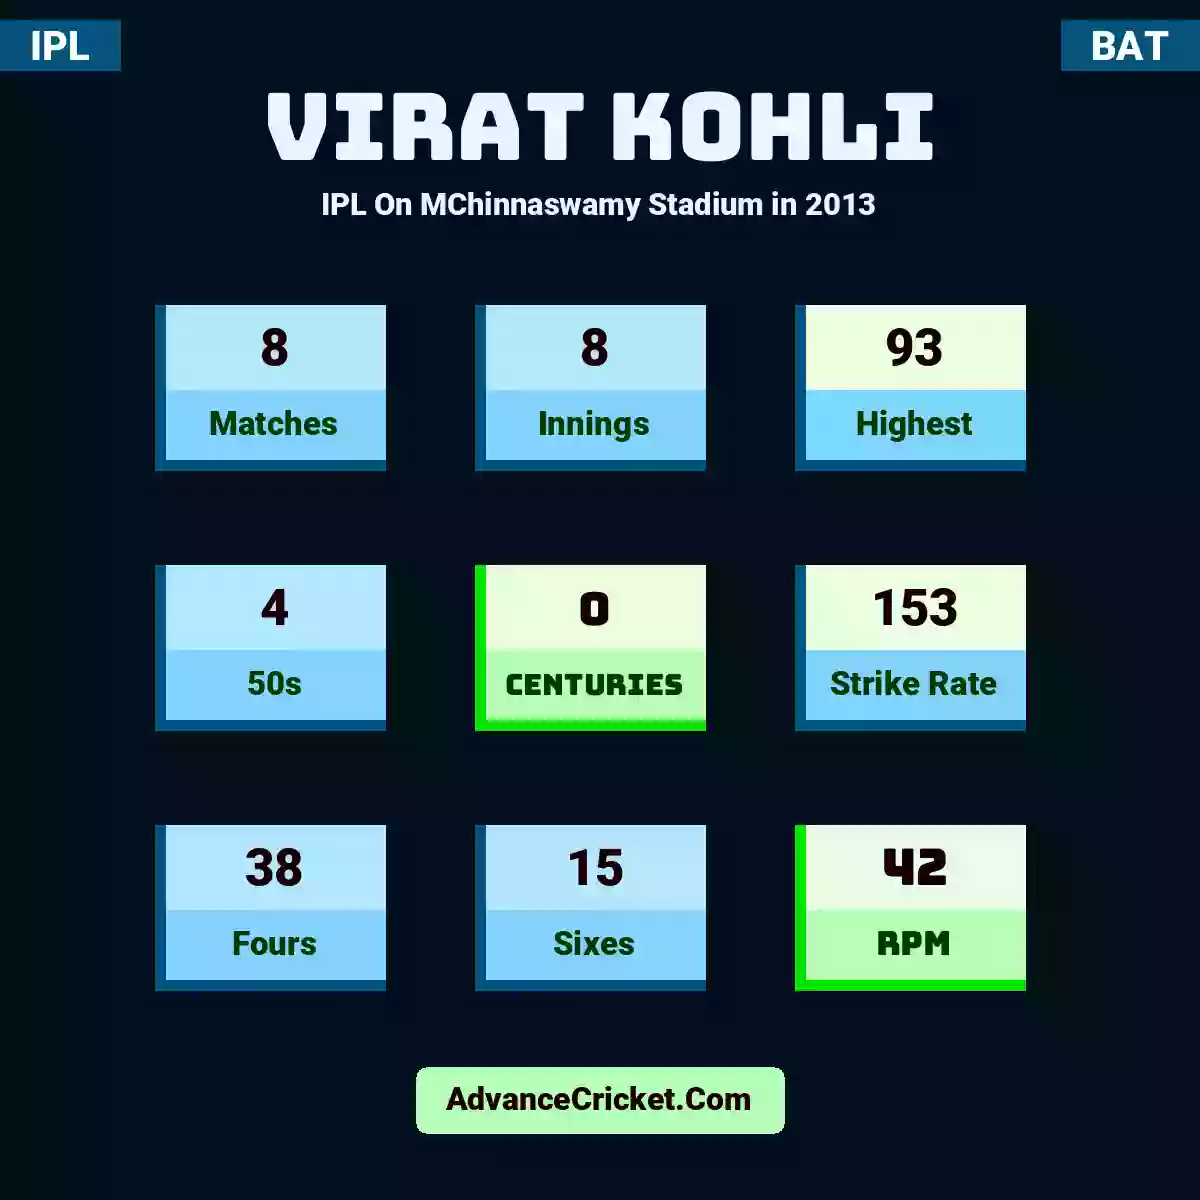 Virat Kohli IPL  On MChinnaswamy Stadium in 2013, Virat Kohli played 8 matches, scored 93 runs as highest, 4 half-centuries, and 0 centuries, with a strike rate of 153. V.Kohli hit 38 fours and 15 sixes, with an RPM of 42.